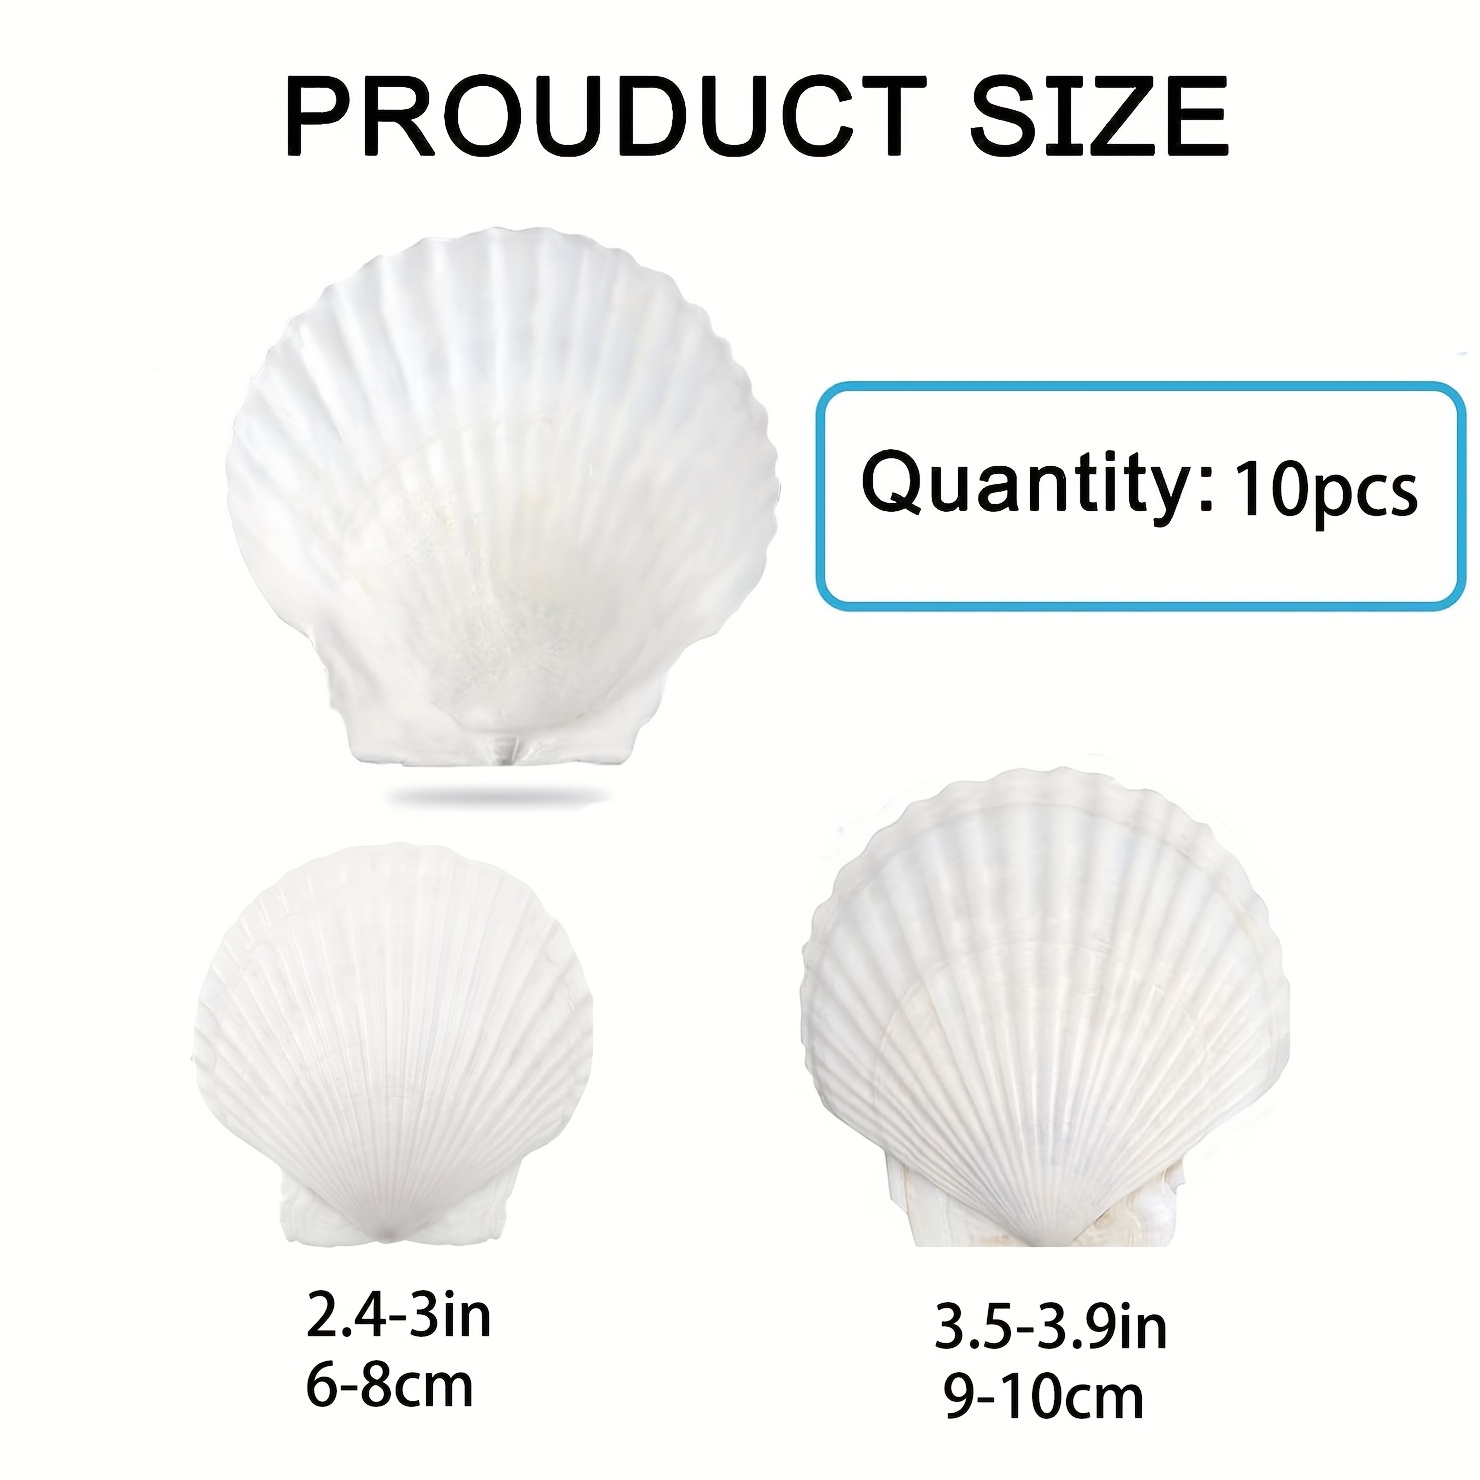 5pcs Sea Shells For Crafts Decoration Crafting White Scallop Shells, For  Crafts DIY Painting Beaching Wedding Decoration, Beach Natural Scallop  Shells